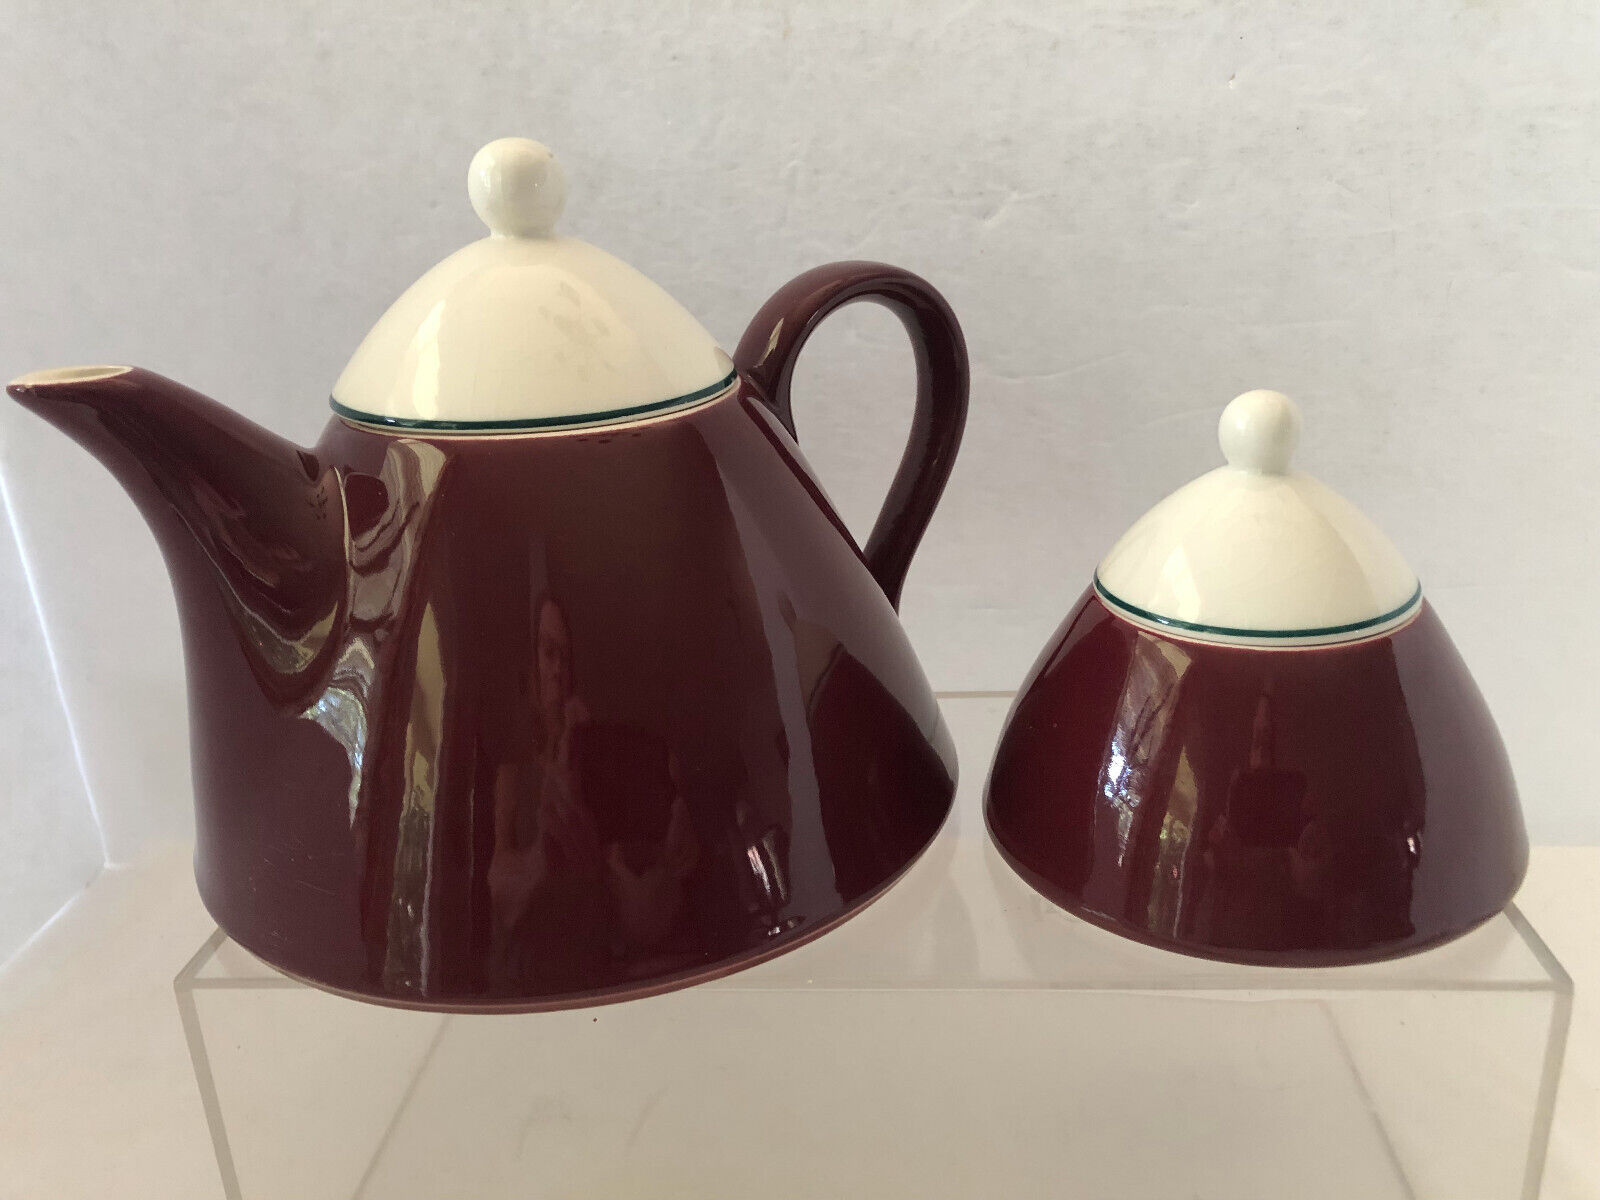 Vintage Pagnossin Treviso Italy teapot and sugar bowl set Maroon White Blue Trim